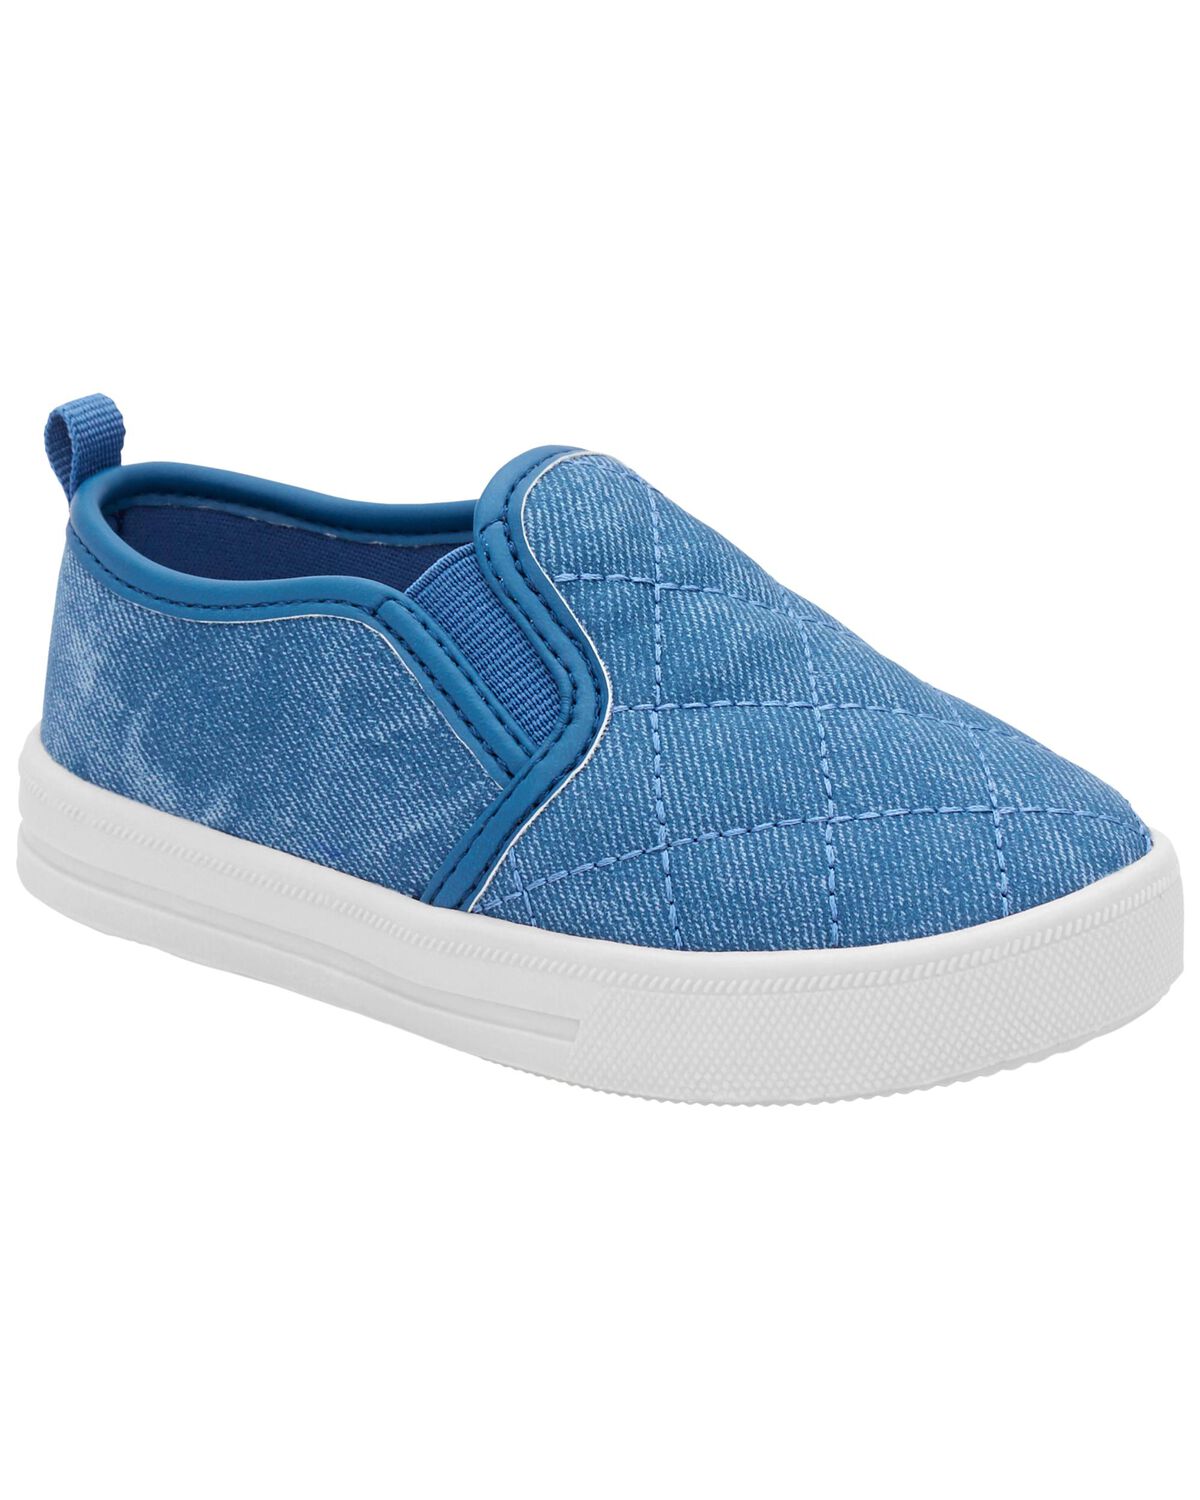 Chambray Kid Quilted Chambray Pull-On Sneakers | oshkosh.com